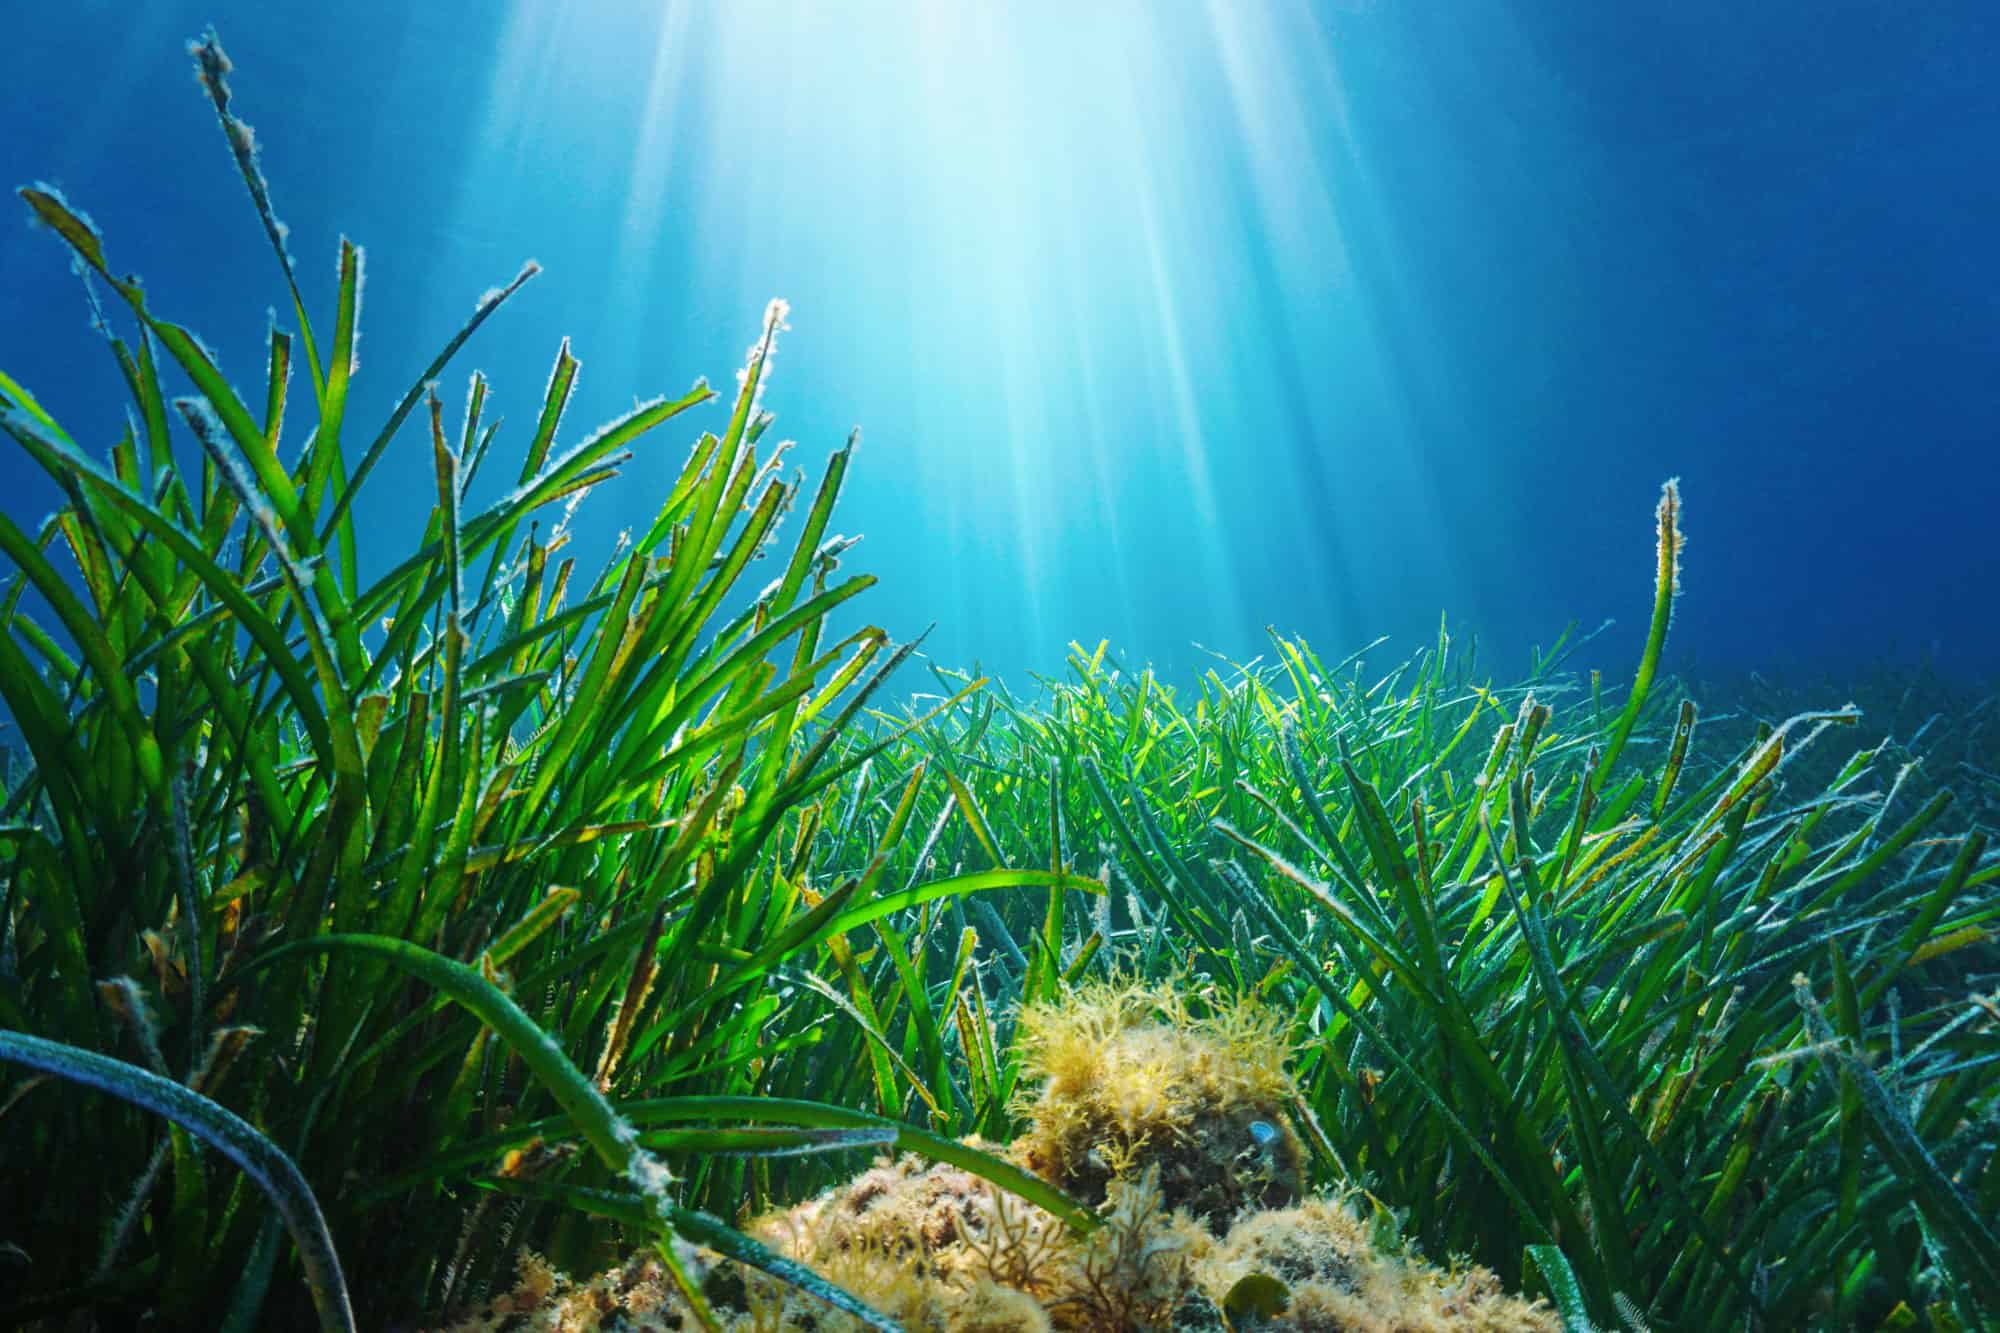 Seagrass guide: what is it and why is it so important? - Discover Wildlife